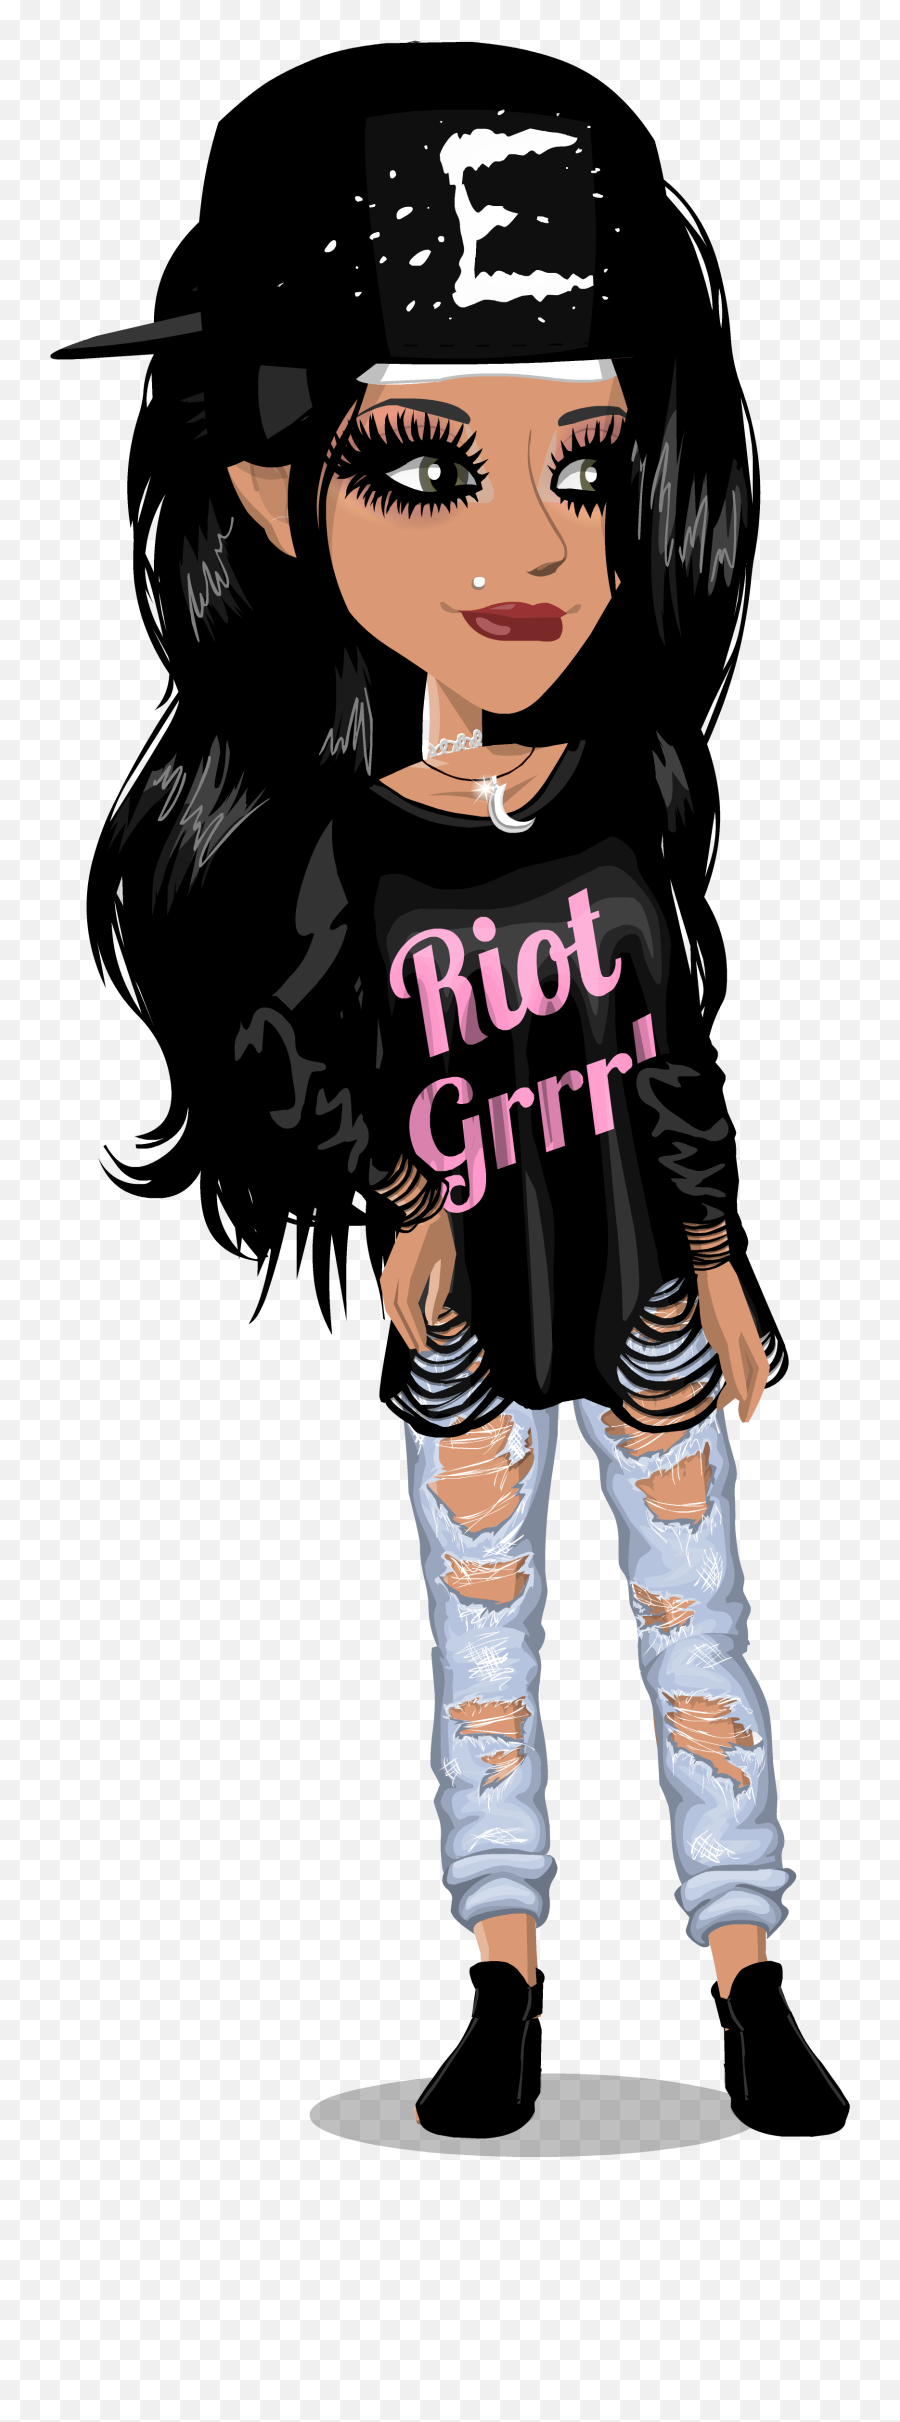 Msp Outfits Vip Ideas - Girly Emoji,How To Use The Emojis That Are For Diamonds On Msp